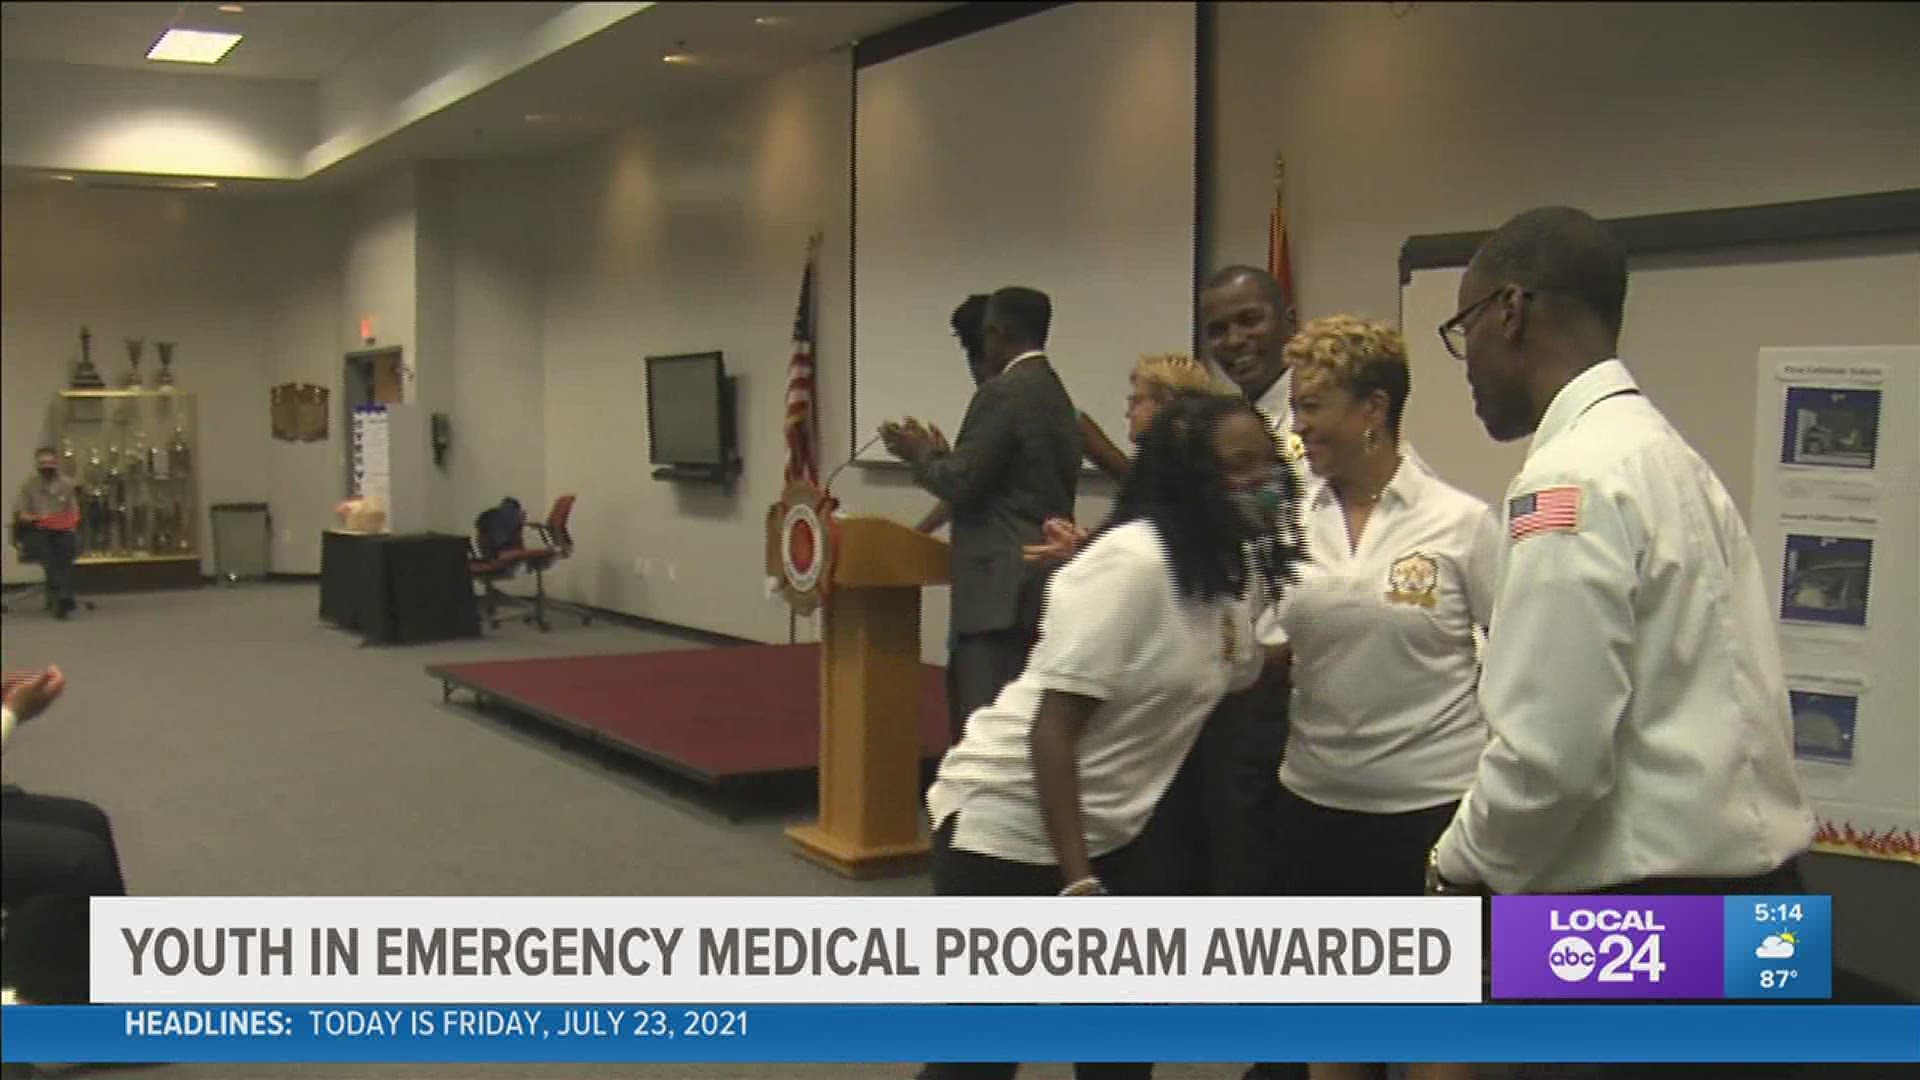 They received awards for completing 130 hours of instructional virtual medical awareness training.